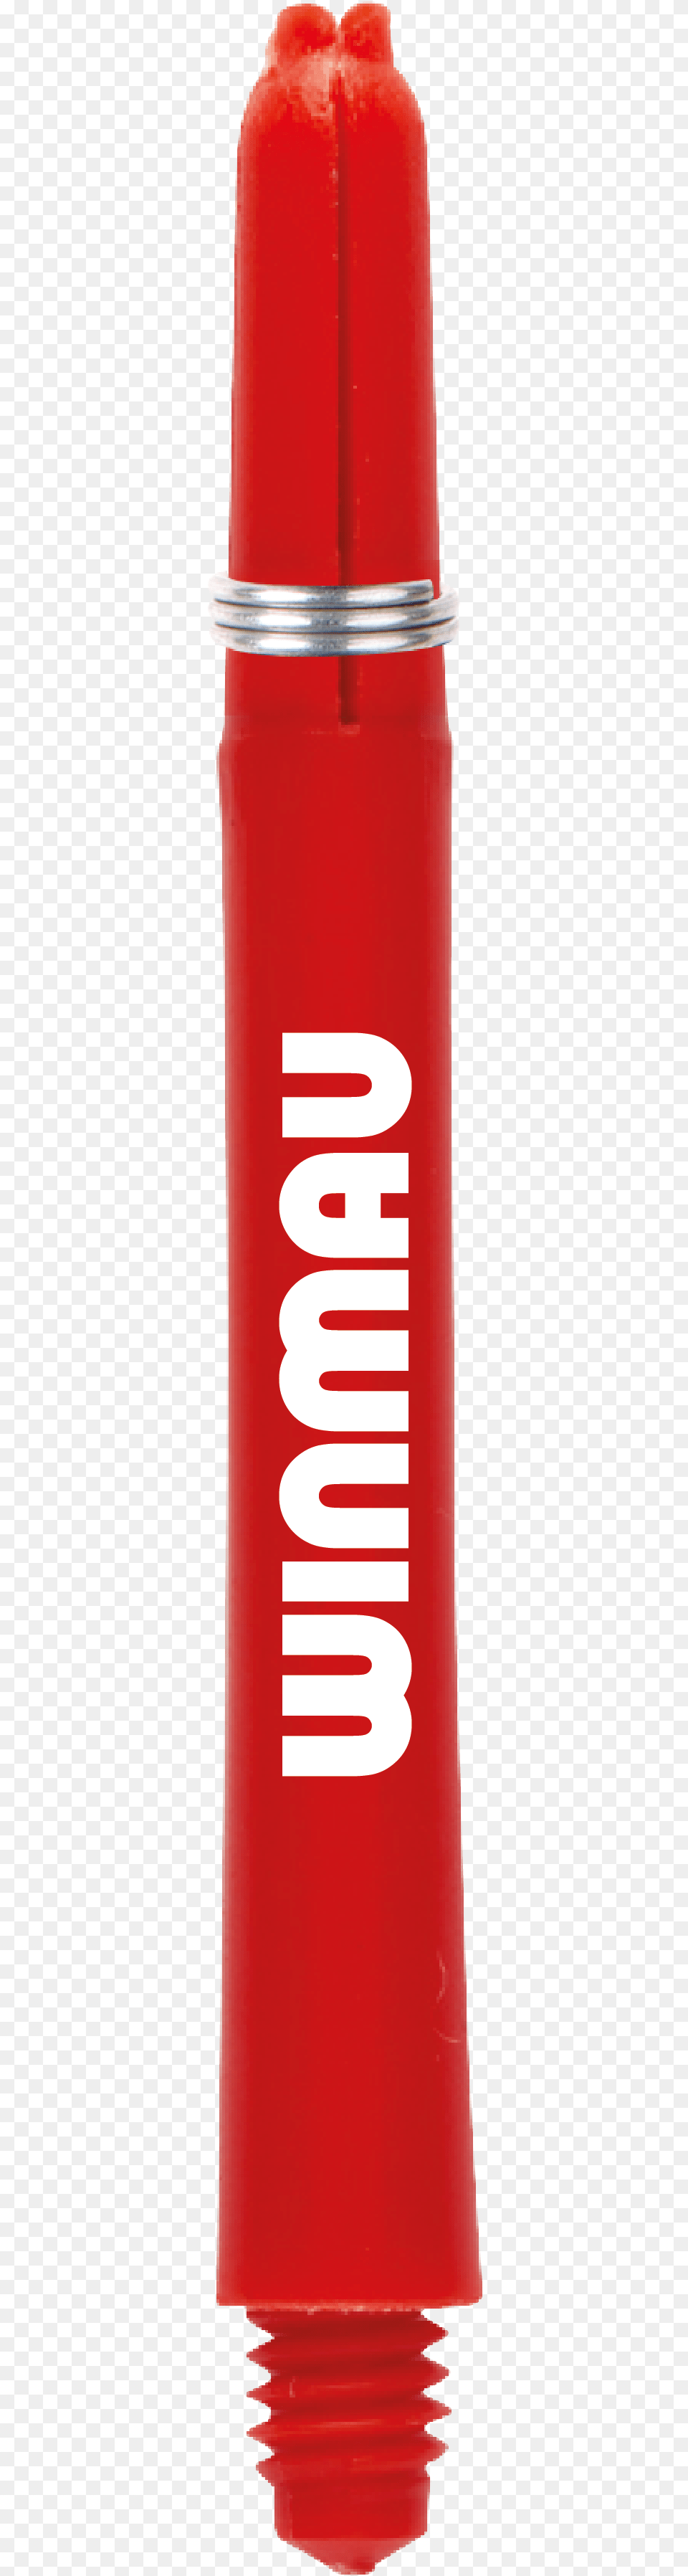 Red X 1 Writing, Bottle, Shaker, Dynamite, Weapon Png Image